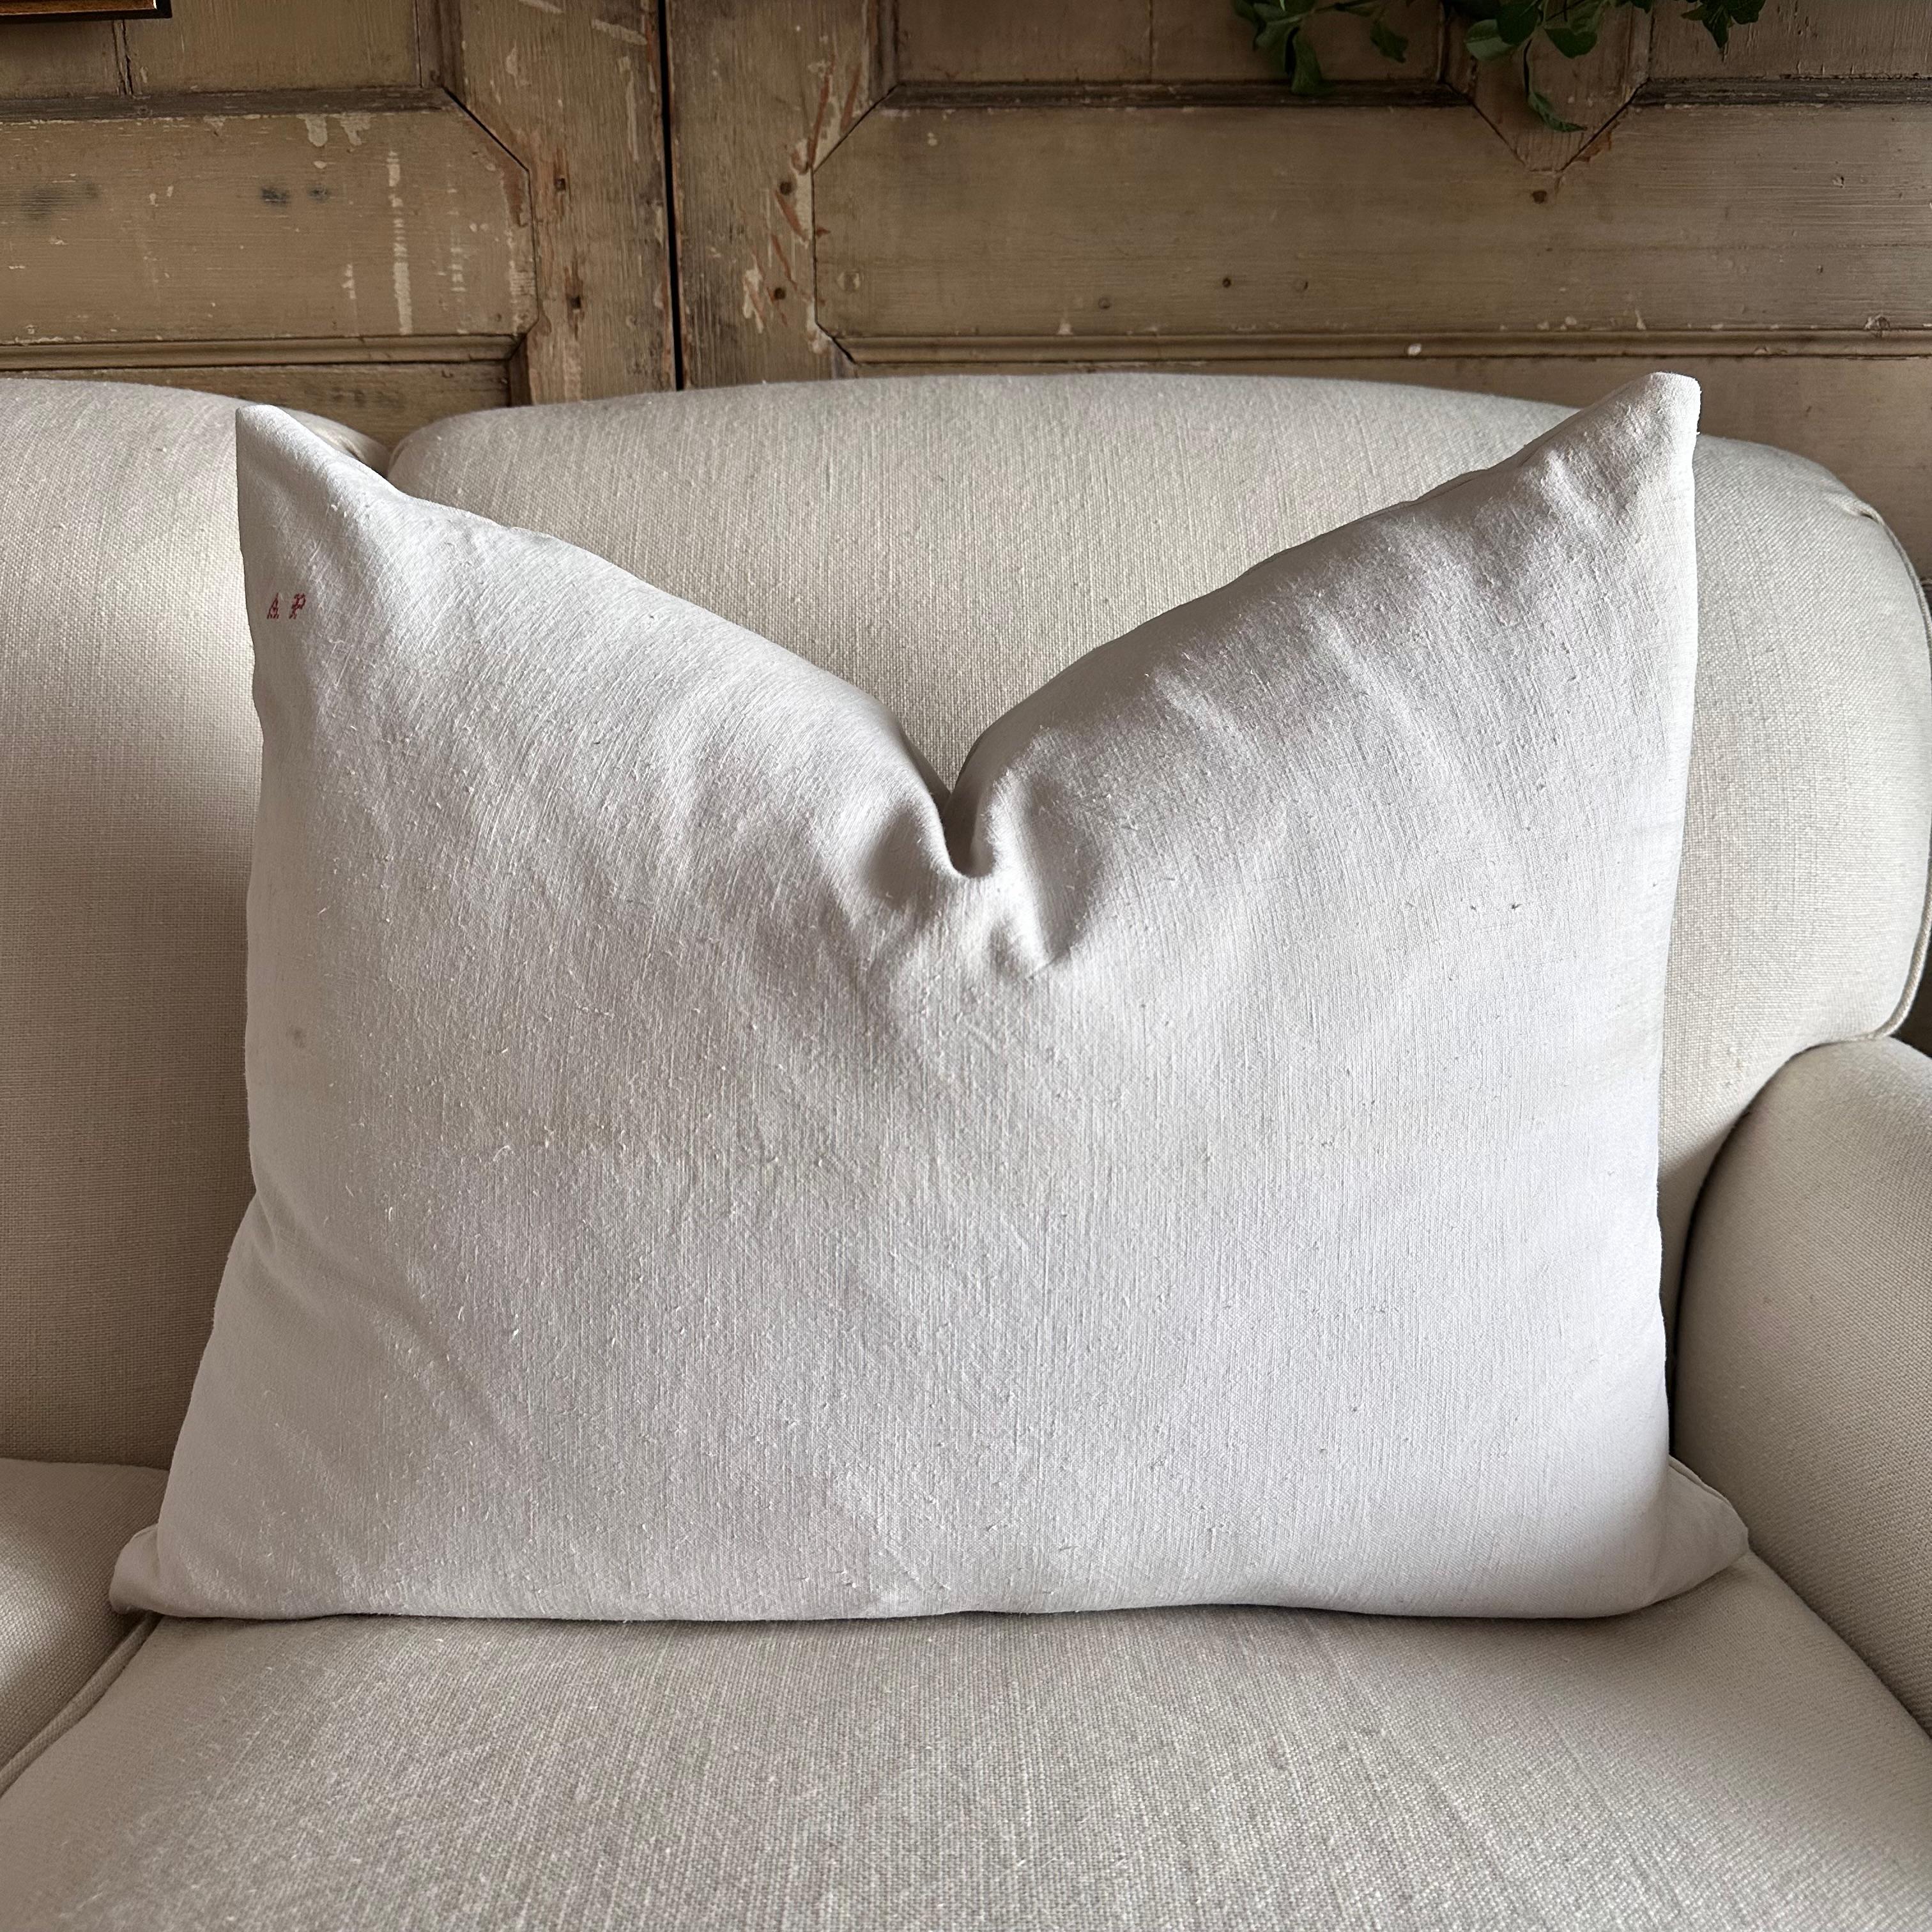 Antique French White Grain Linen Pillows with Insert In New Condition For Sale In Brea, CA